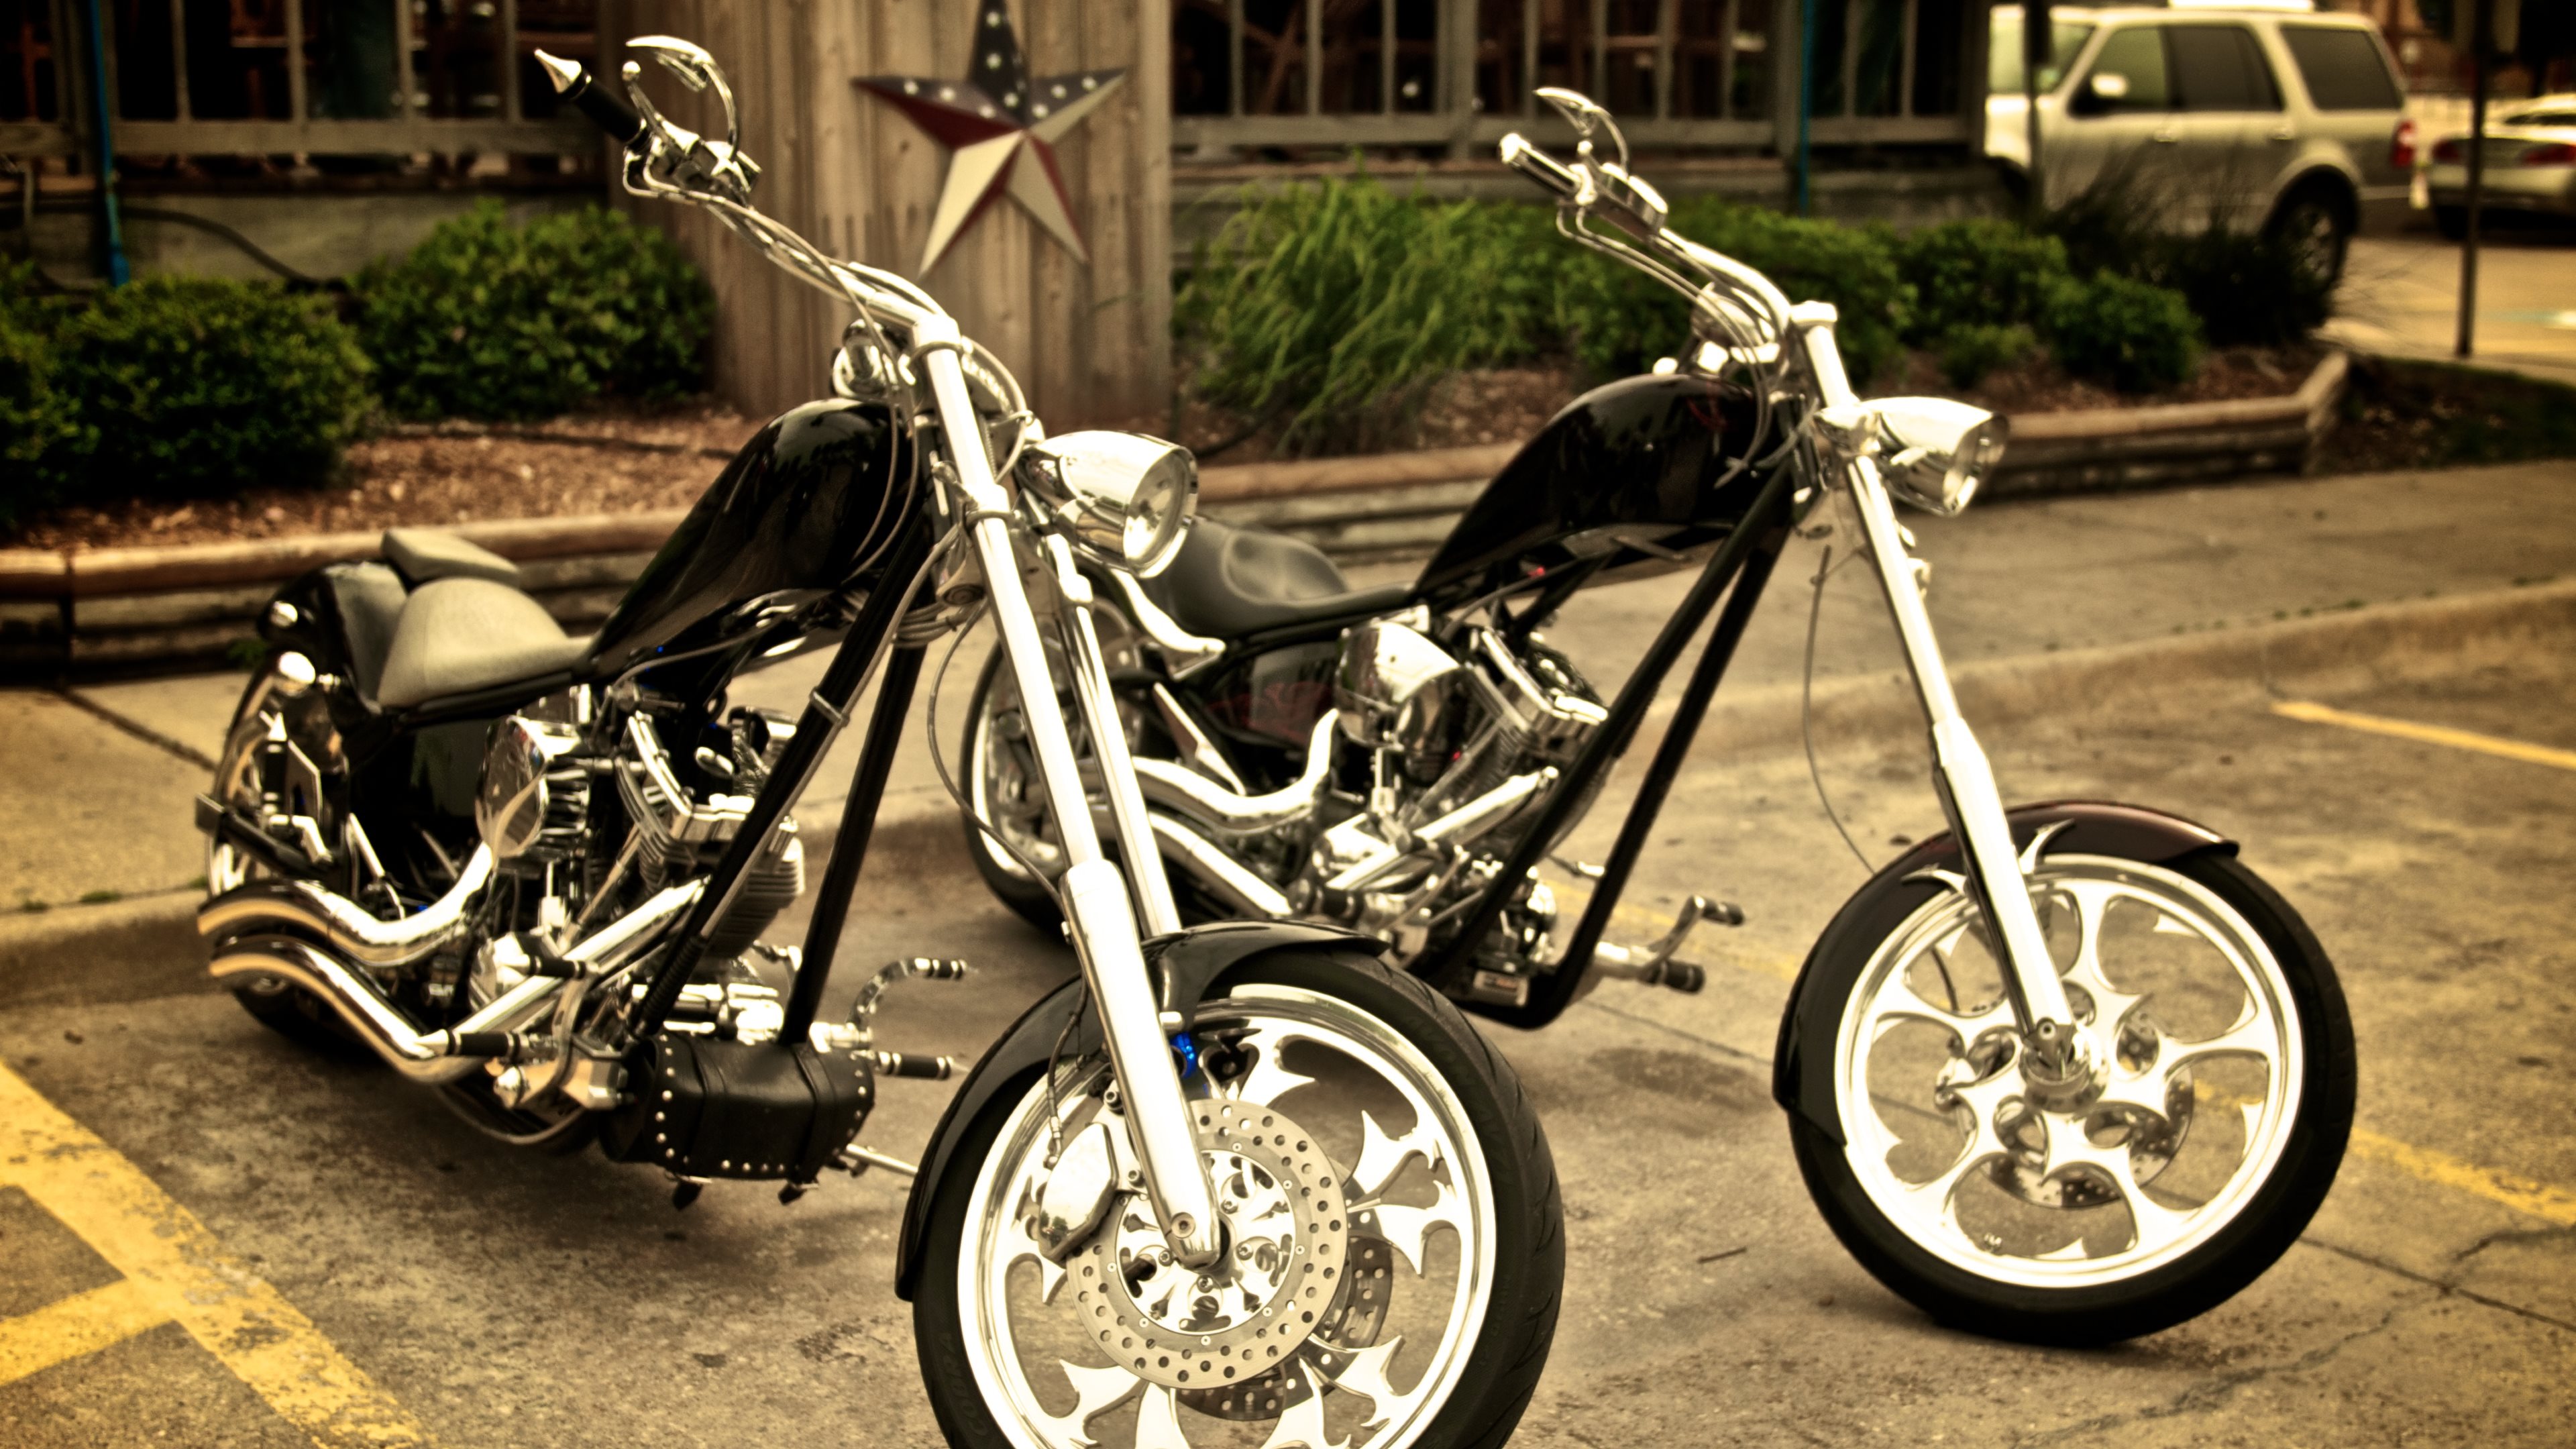 vehicles, chopper, motorcycle